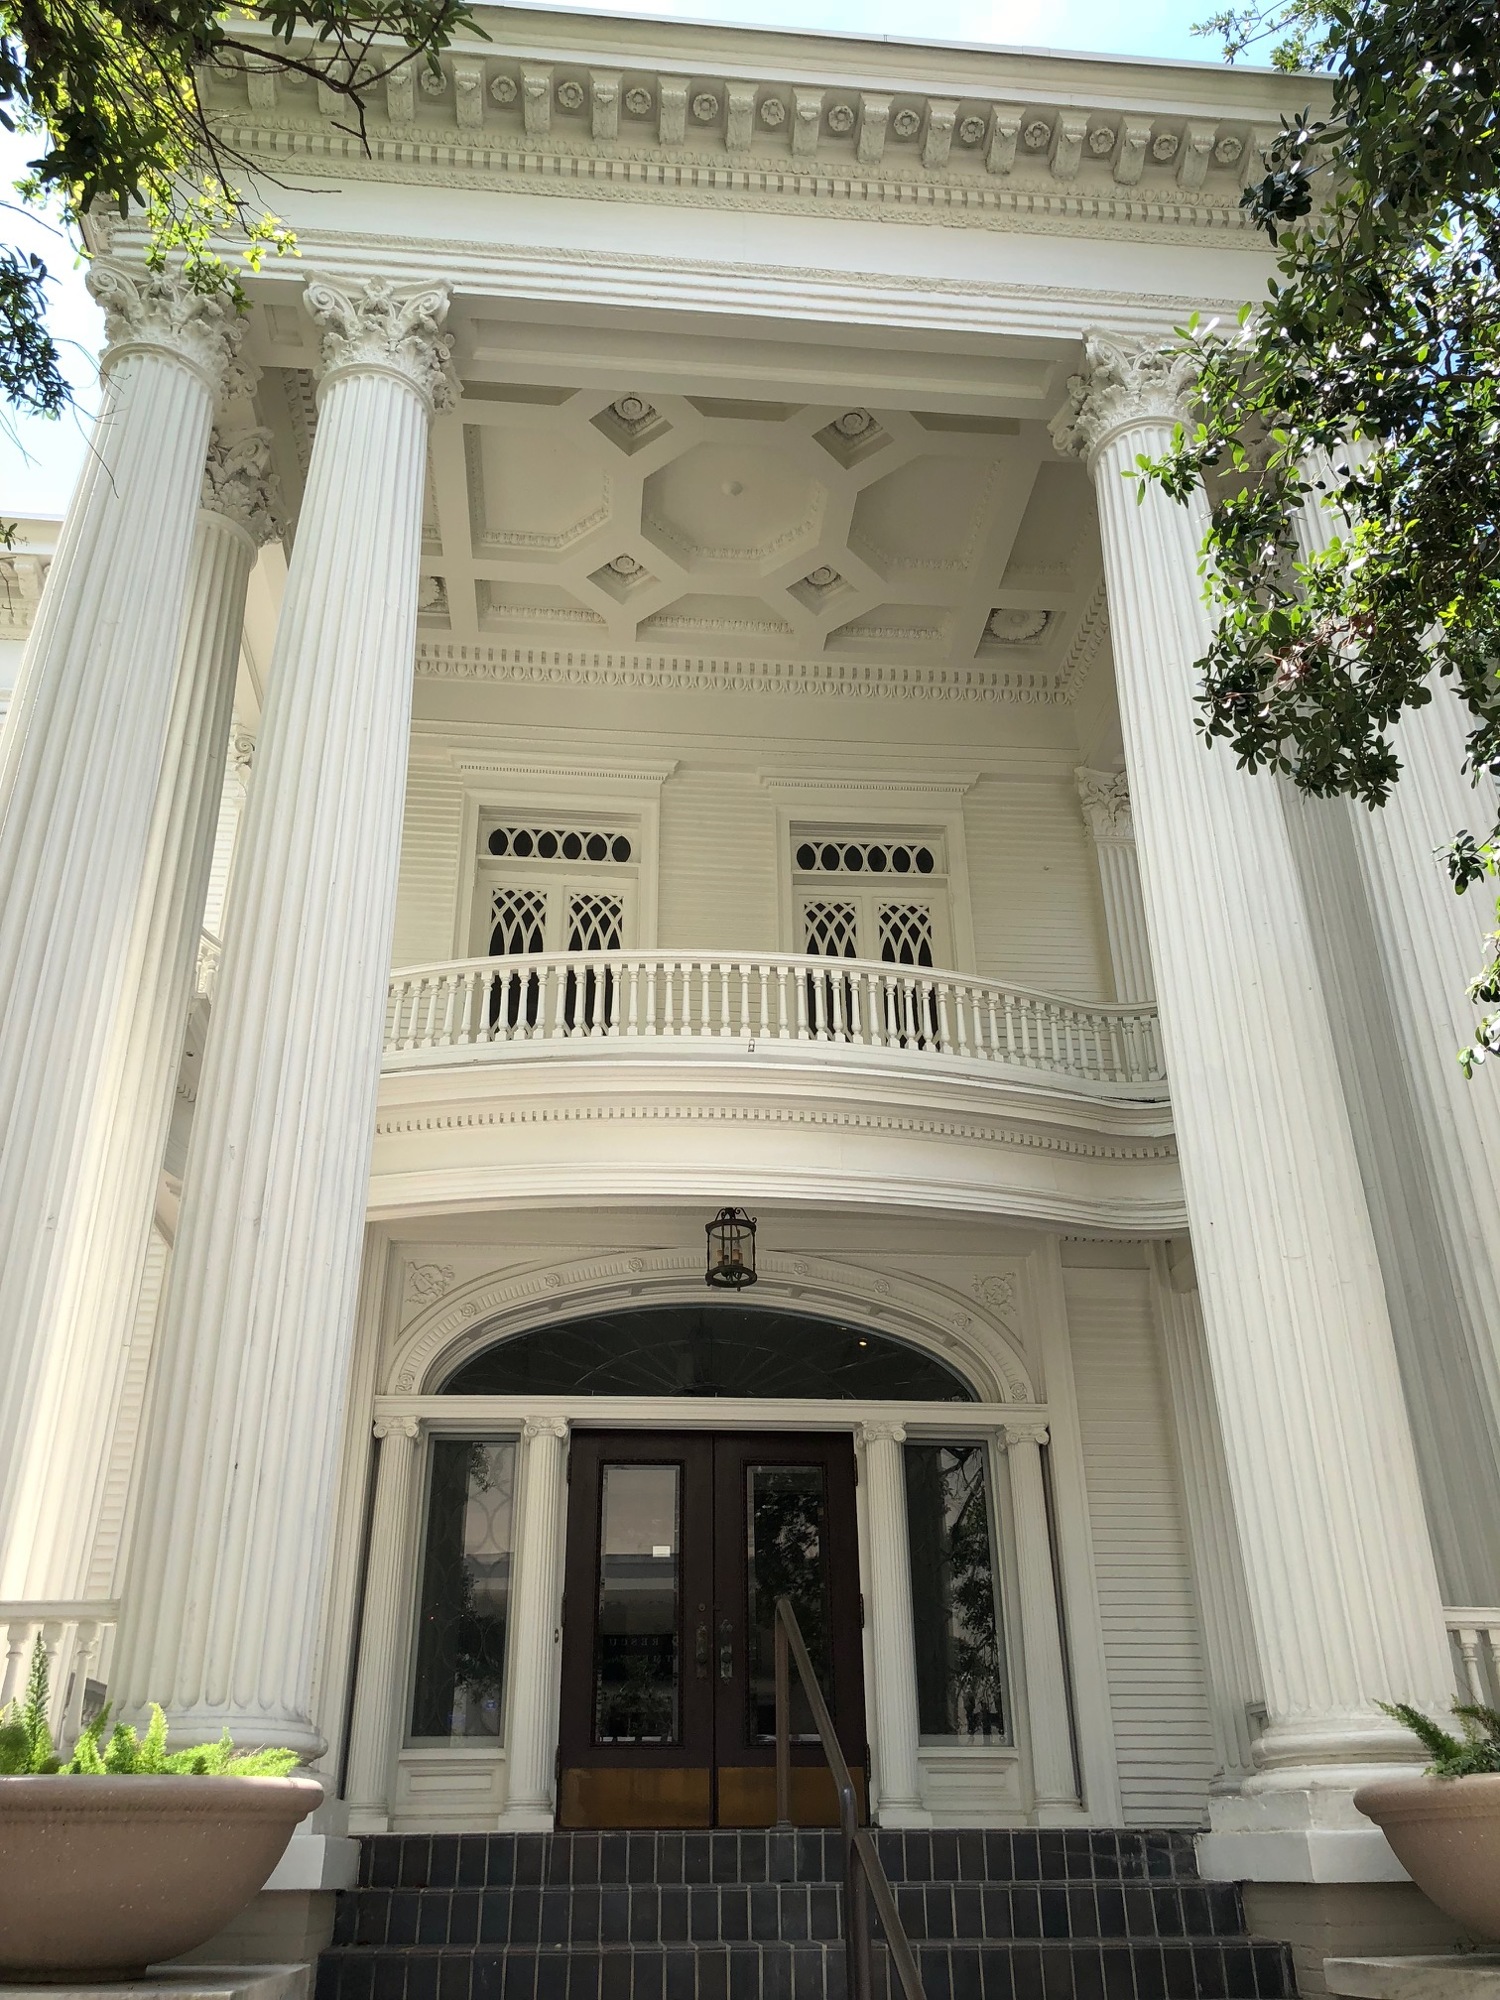 The entrance to the Porter House Mansion at 510 N. Julia St.